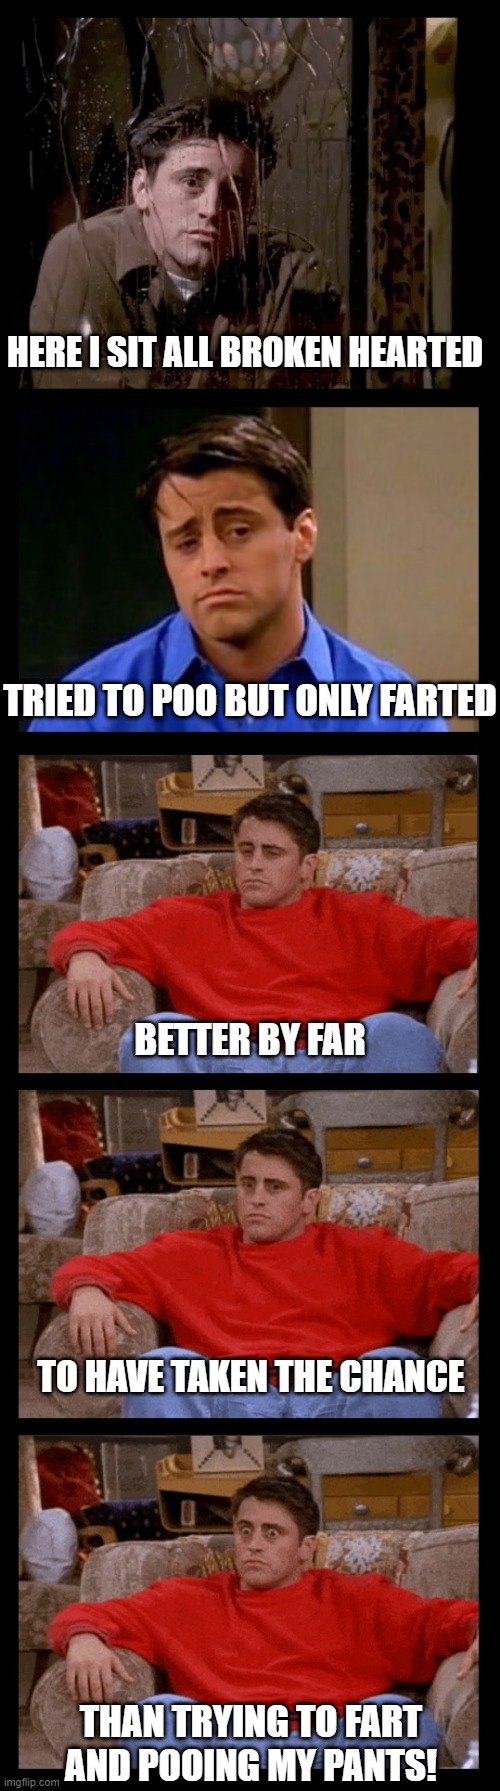 Good call, Joey | HERE I SIT ALL BROKEN HEARTED; TRIED TO POO BUT ONLY FARTED; BETTER BY FAR; TO HAVE TAKEN THE CHANCE; THAN TRYING TO FART AND POOING MY PANTS! | image tagged in friends,joey,joey from friends,poop,farting,deep thoughts | made w/ Imgflip meme maker